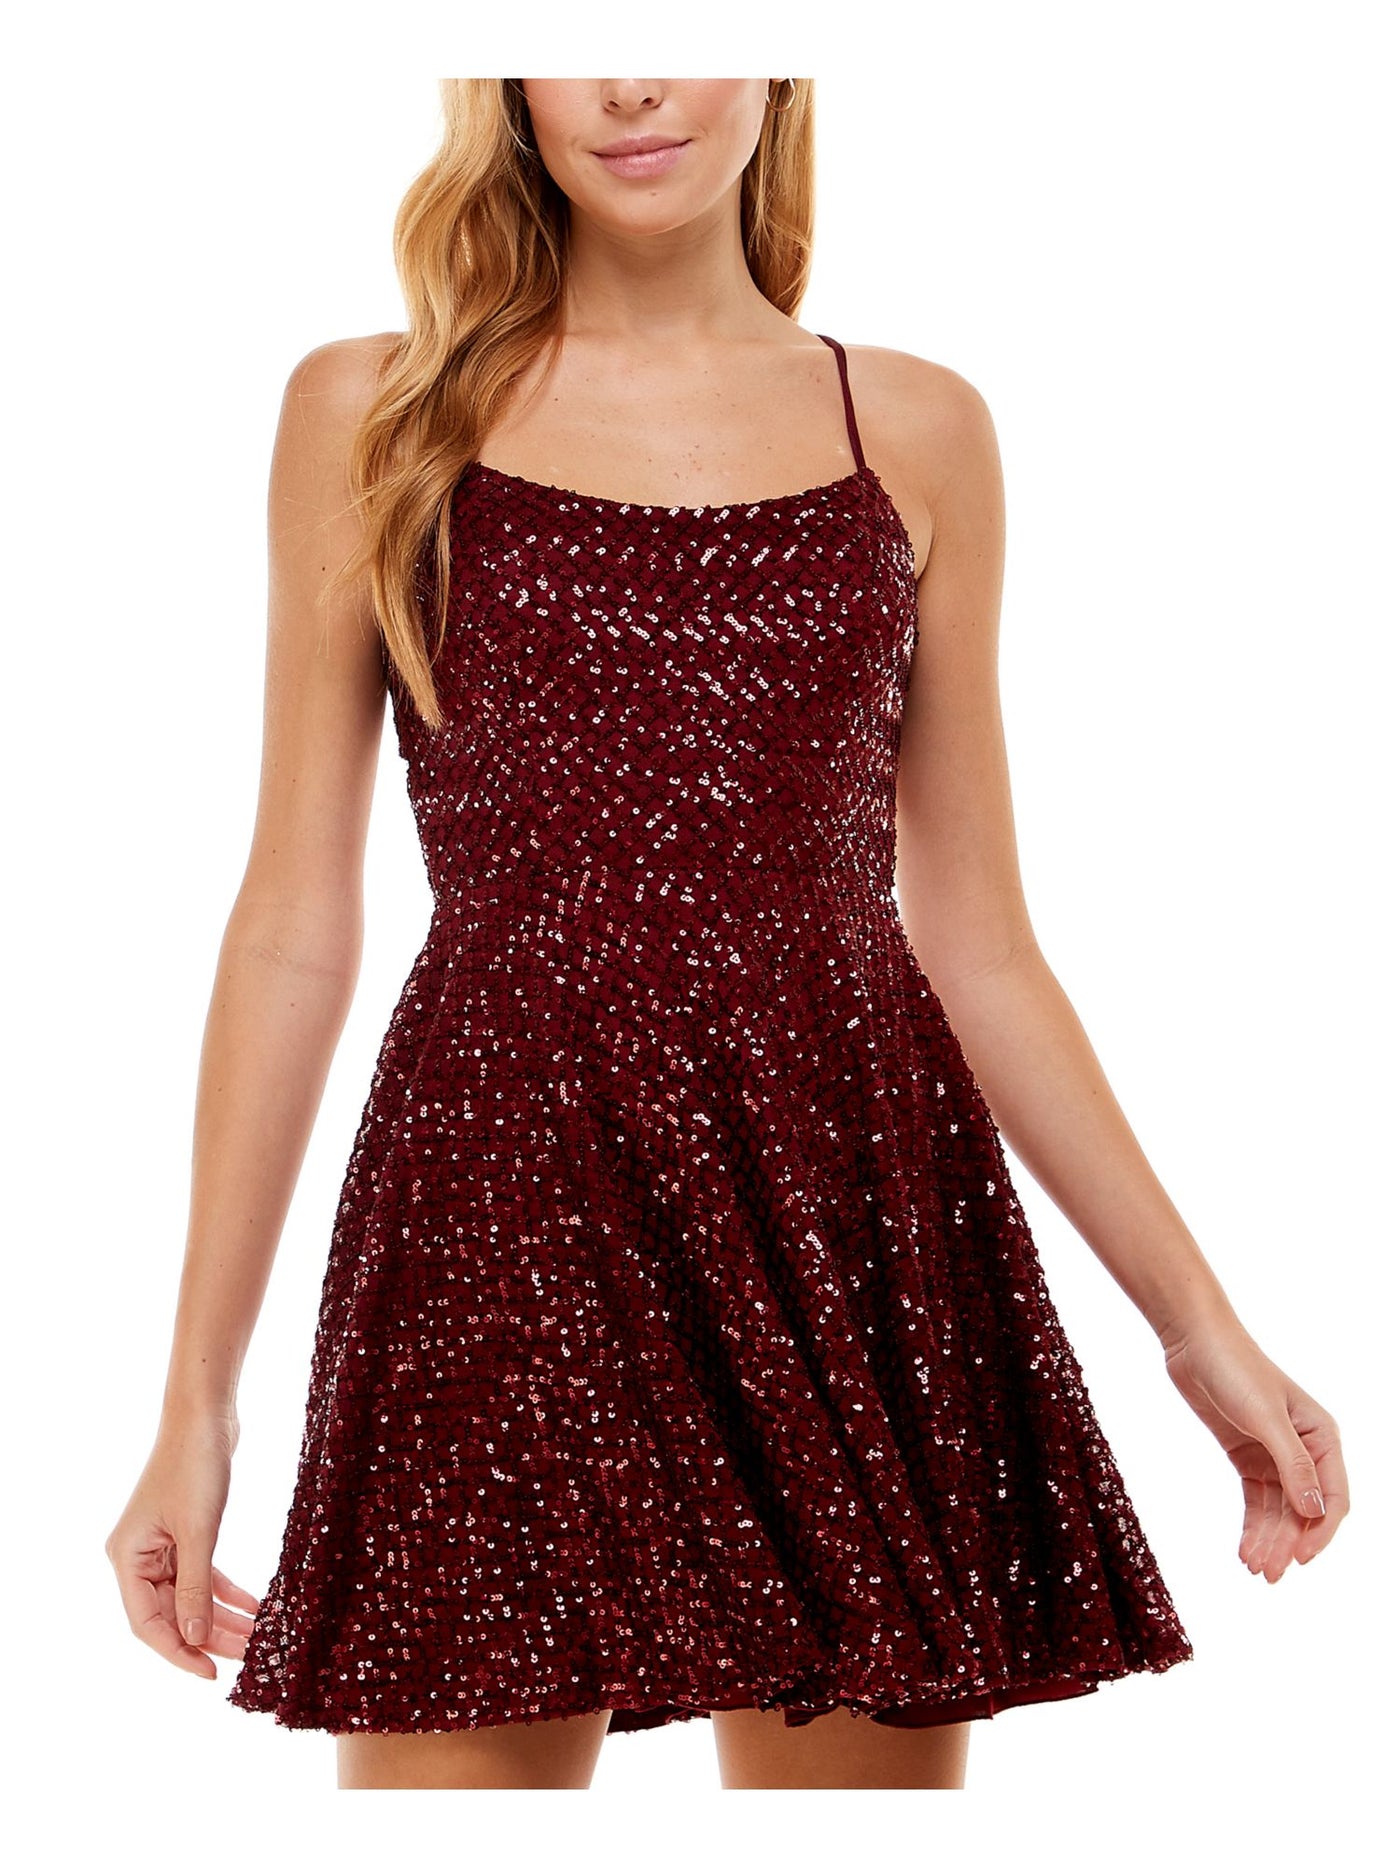 CITY STUDIO Womens Burgundy Stretch Sequined Zippered Lace-up Tie Back Padded Cups Spaghetti Strap Scoop Neck Short Party Fit + Flare Dress Juniors 11